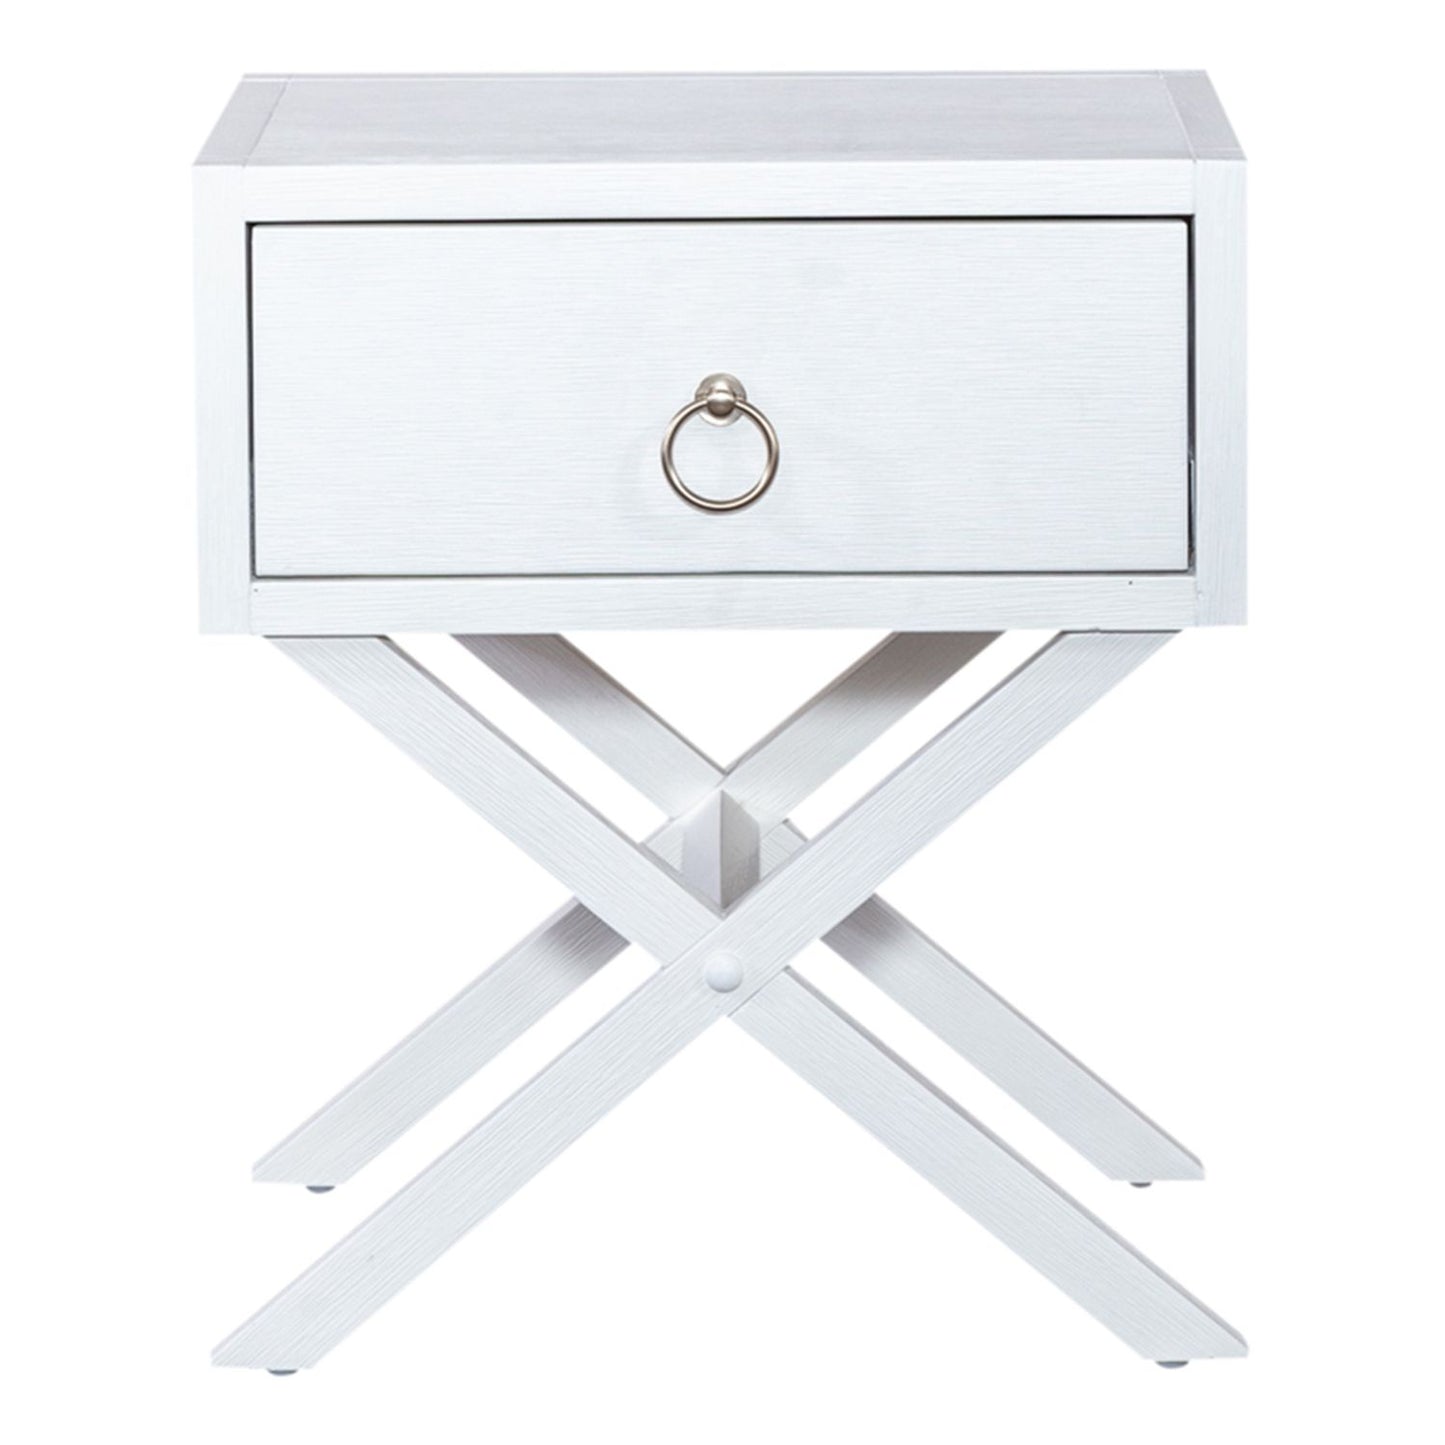 East End - 1 Drawer Accent Table